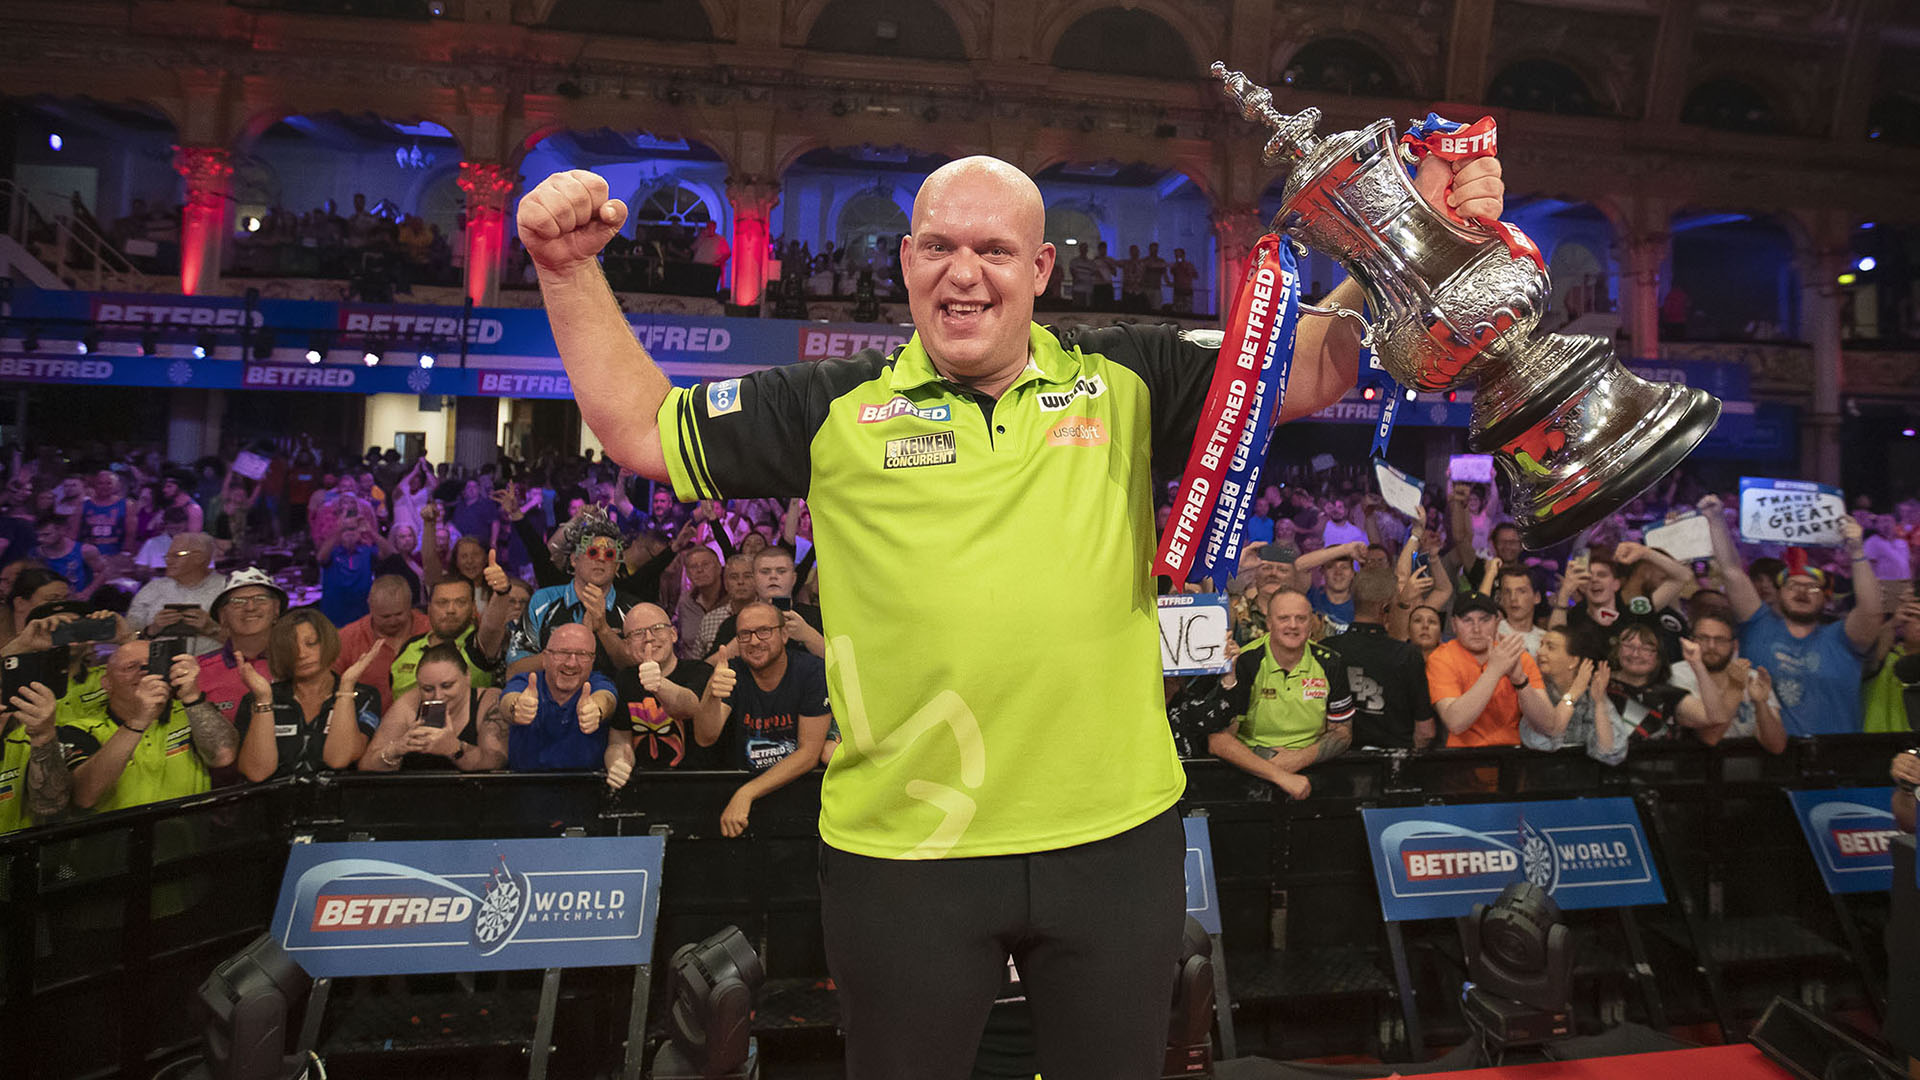 World Matchplay Darts 2022 Draw, schedule, results, betting odds and Sky TV coverage details